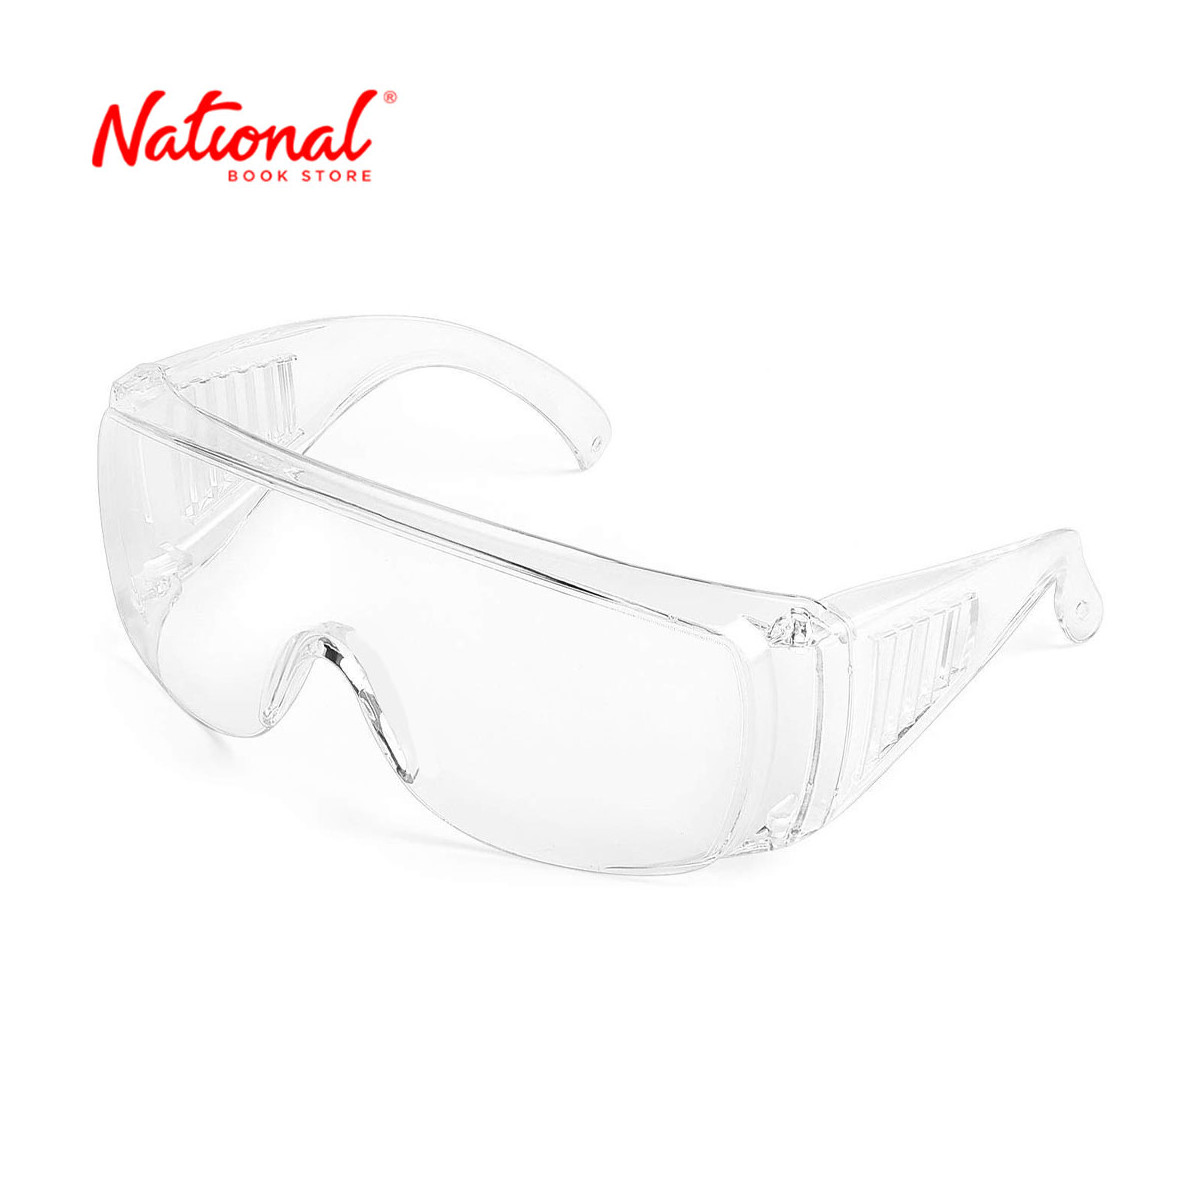 Prohealthcare Safety Glasses - School & Office Supplies - Laboratory Supplies